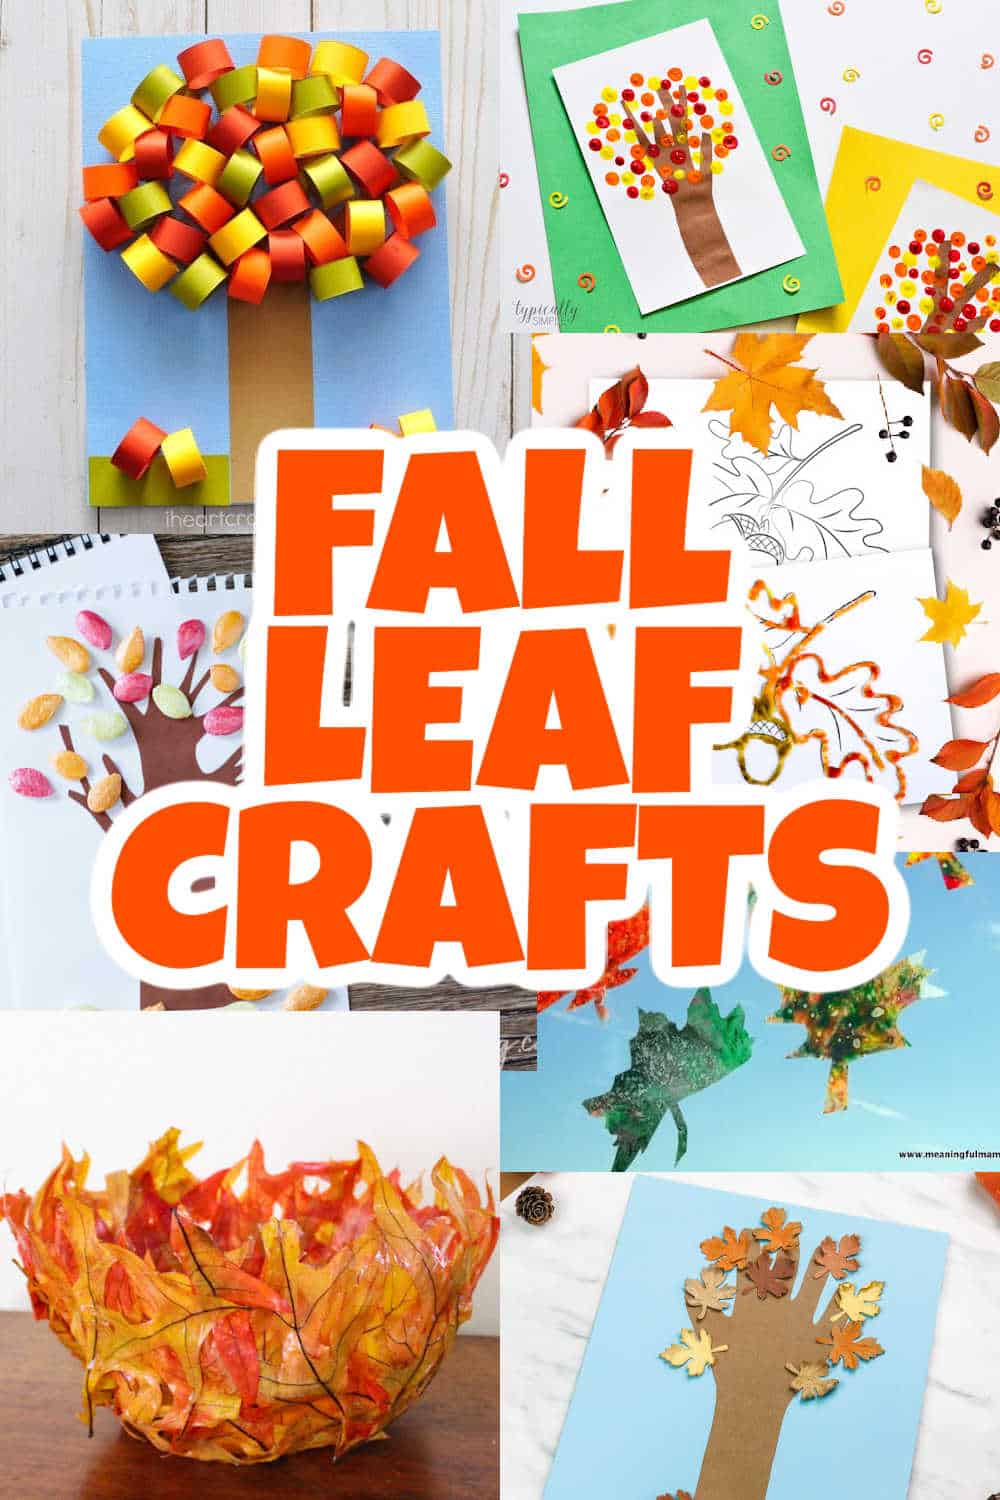 Nature Art Activities for Toddlers: Painting with Leaves, Flowers